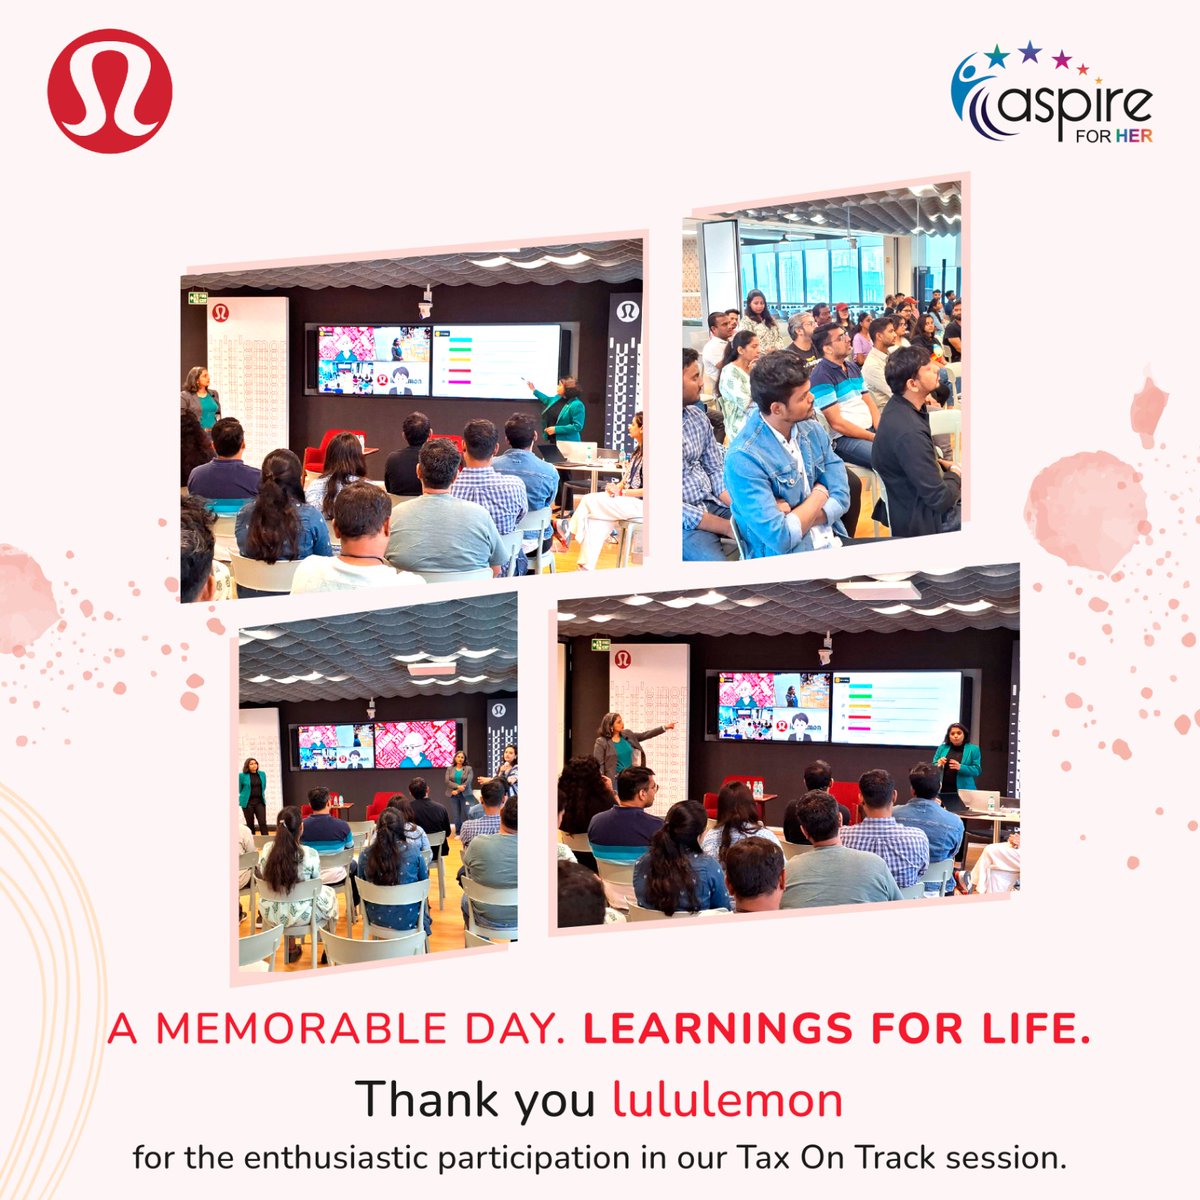 Some moments from our recent tax session at lululemon India, where Shilpa Bhaskar Gole & Nisha Dhanuka guided their employees on tax-related knowledge, optimisation tactics & more. The session was a huge success! Equip your employees with tax knowledge: aspireforher.com